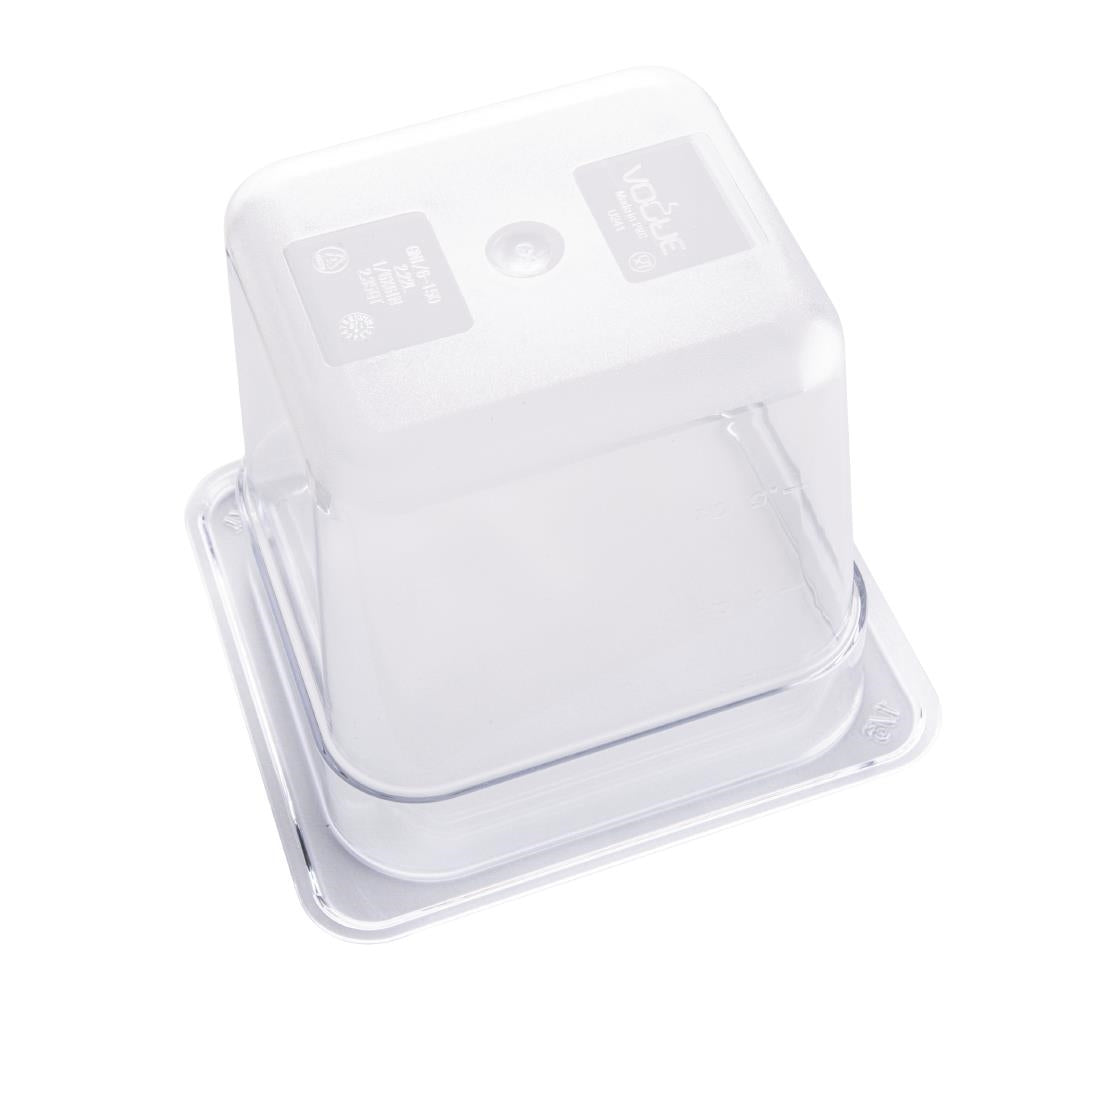 Vogue Polycarbonate 1/6 Gastronorm Container 150mm Clear